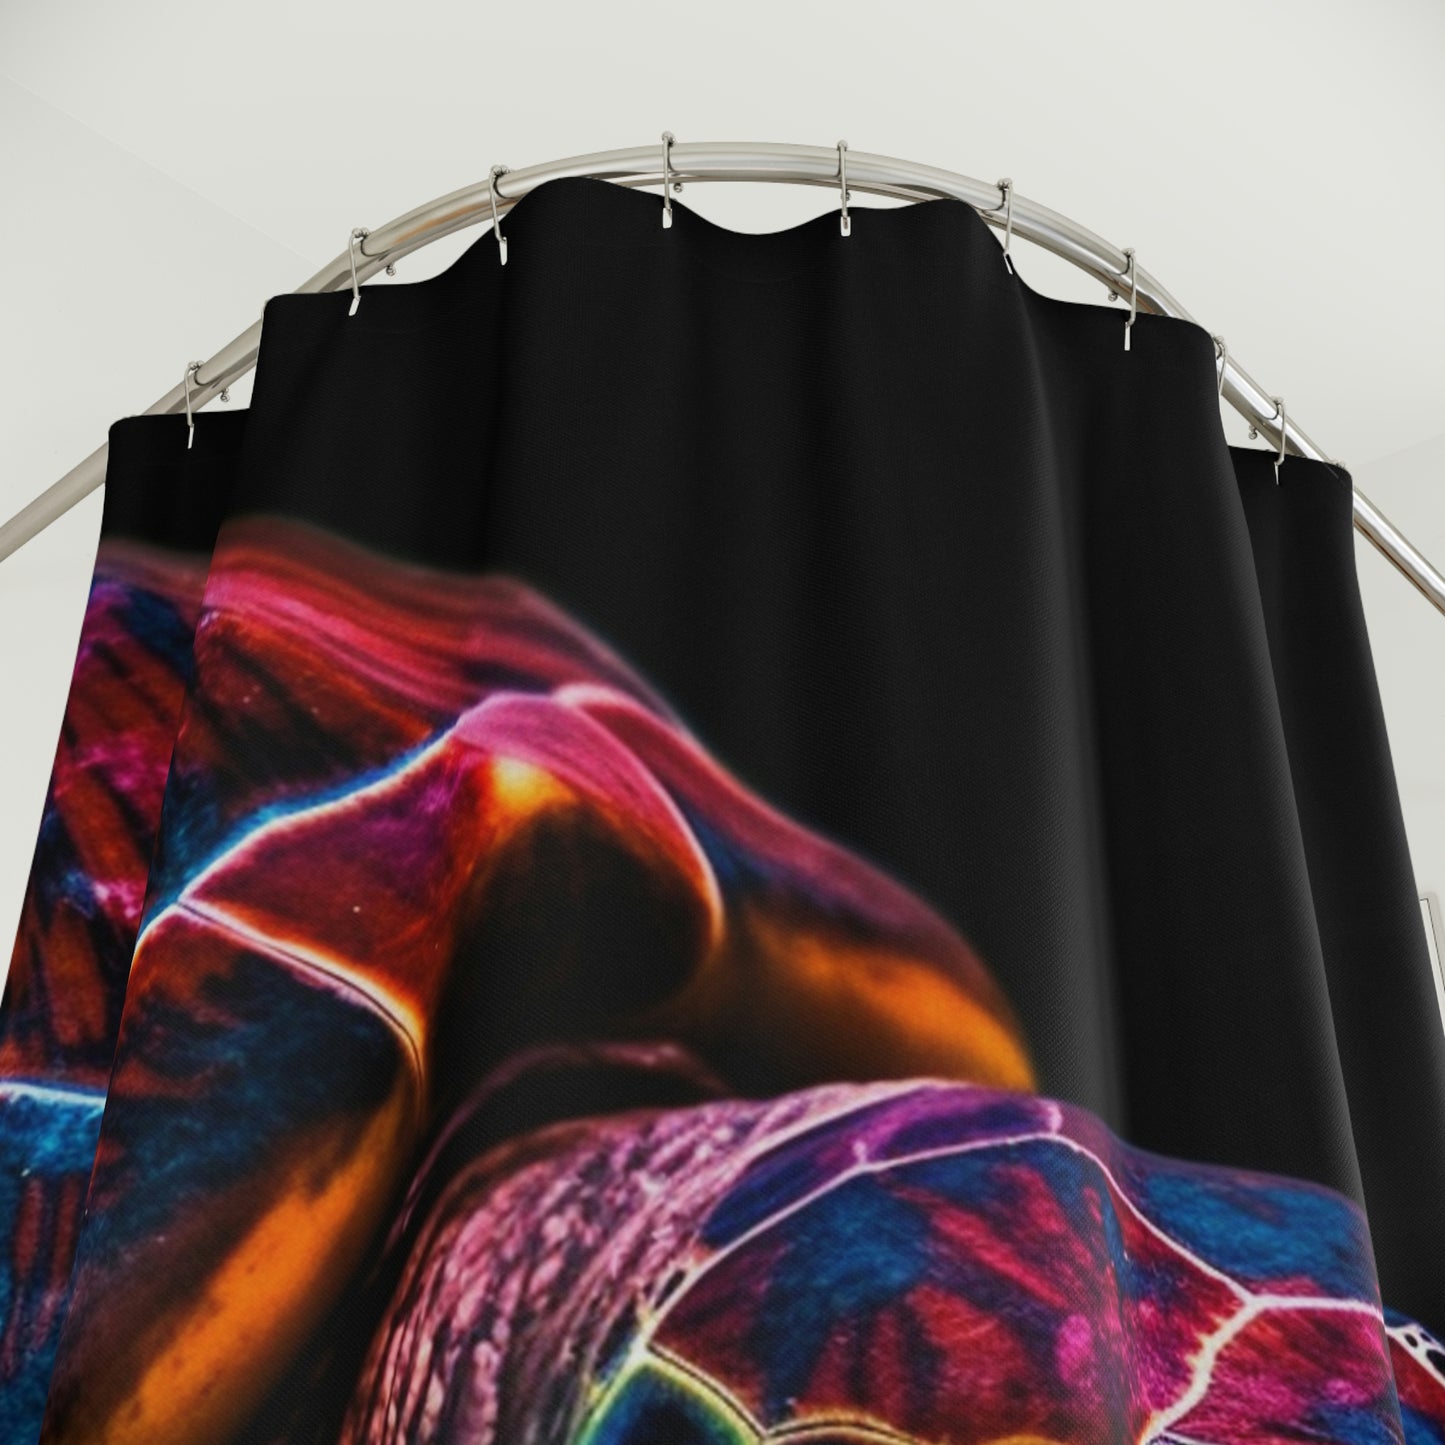 Polyester Shower Curtain neon turtle 3